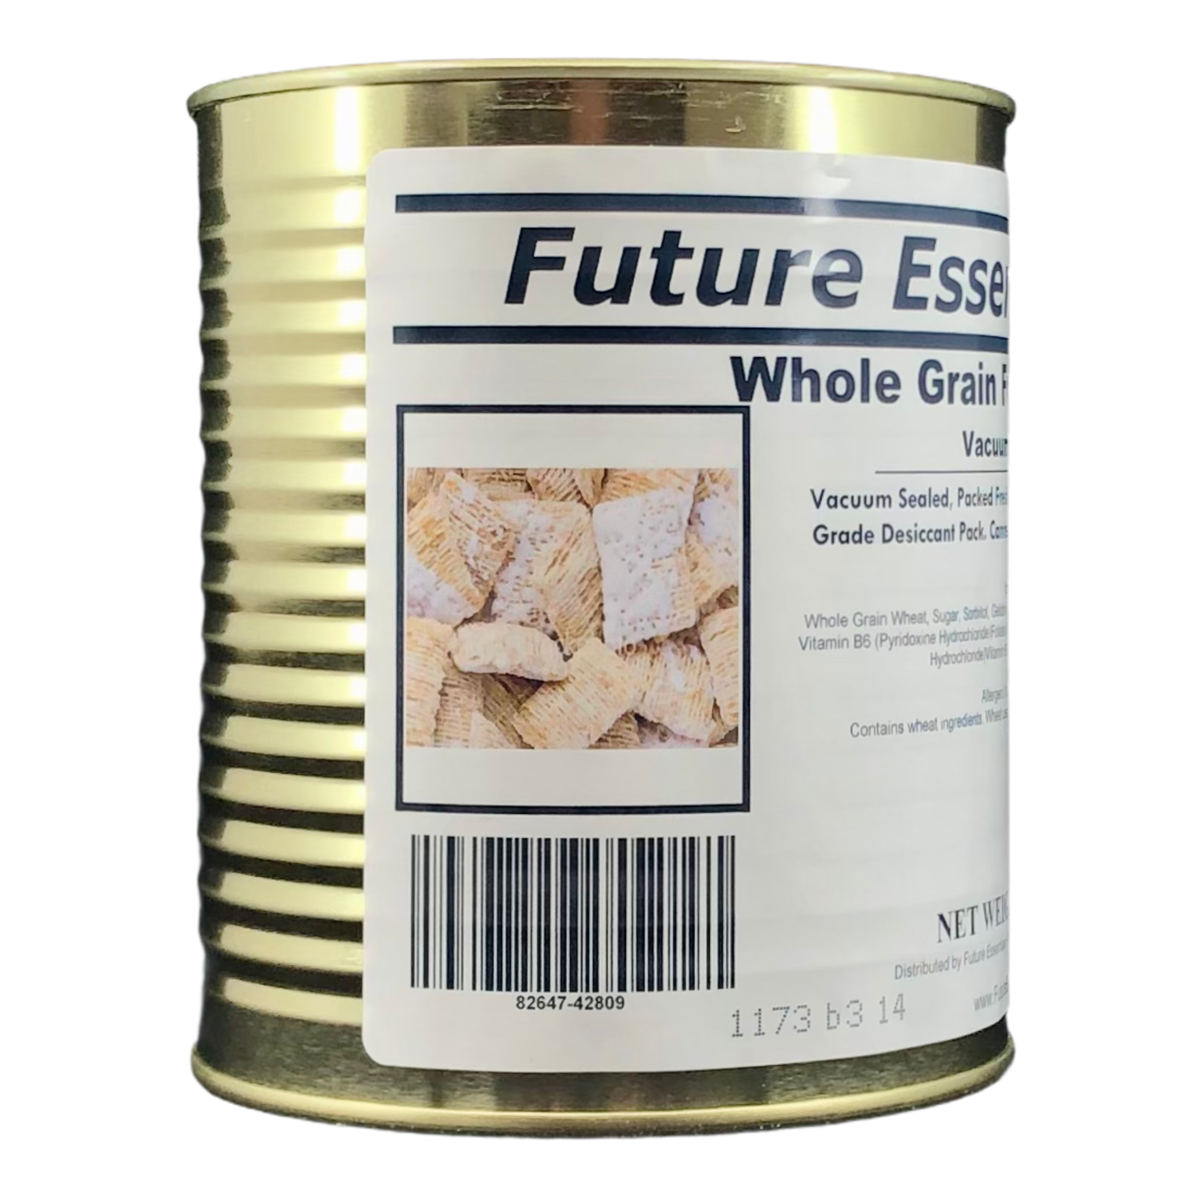 Future Essentials. Whole Grain Frosted Wheats Cereal. #2.5 Can